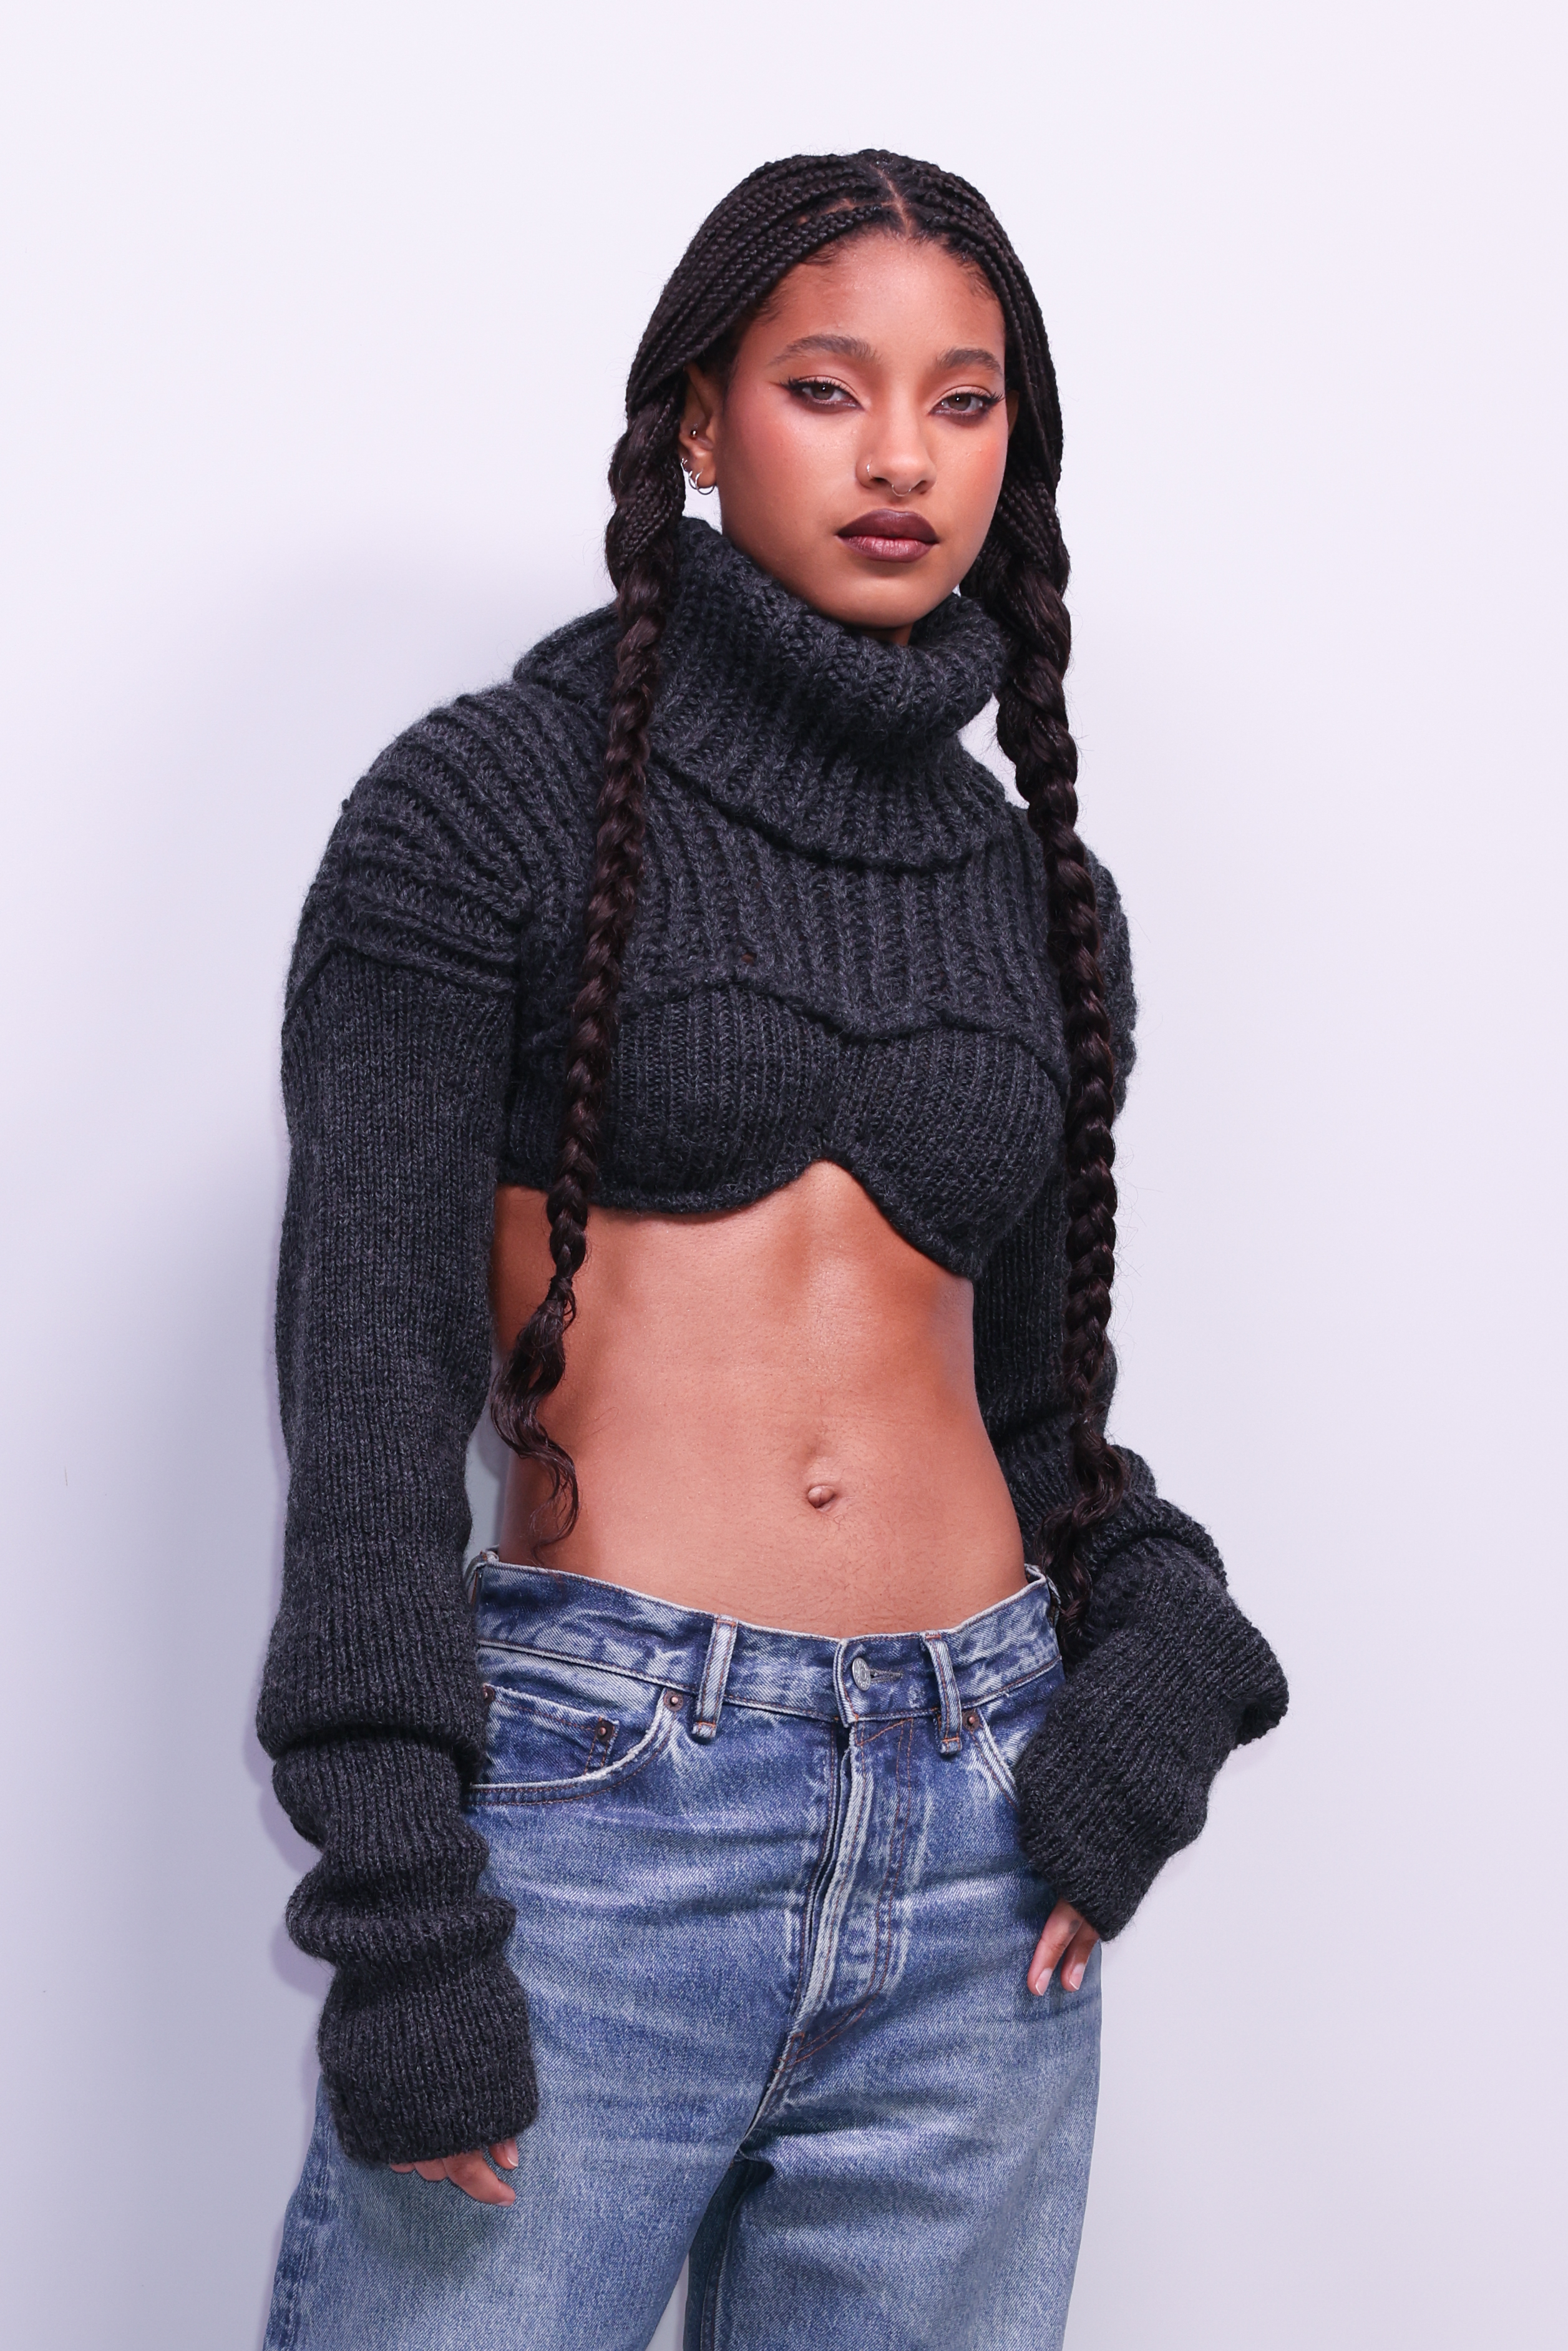 WIllow poses in a cropped turtleneck sweater and jeans